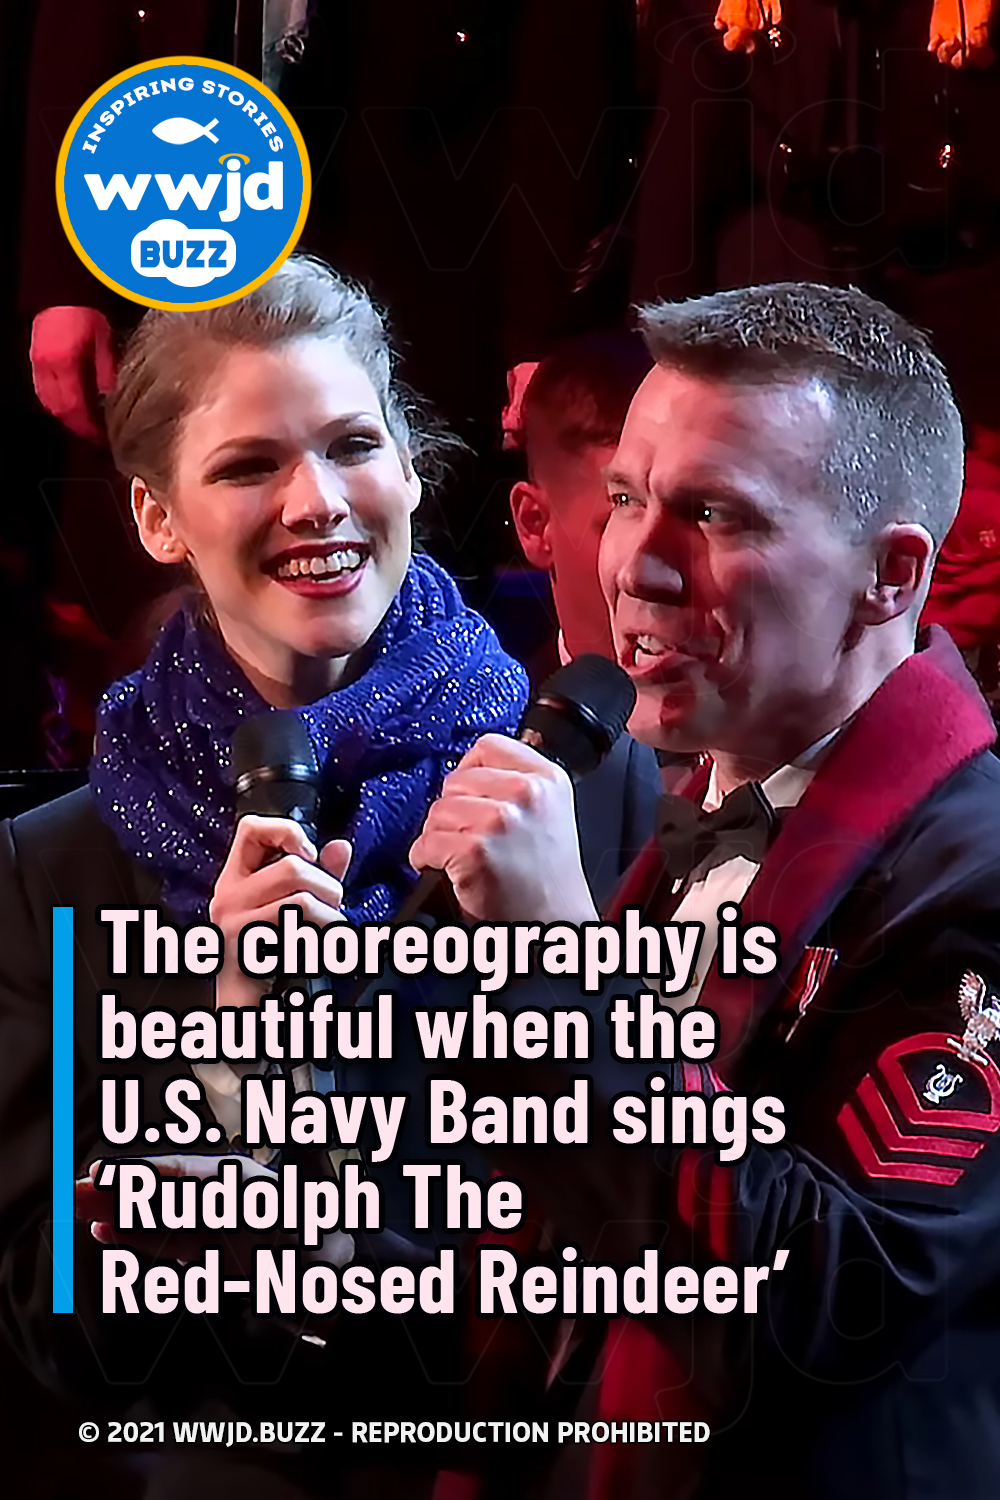 The choreography is beautiful when the U.S. Navy Band sings ‘Rudolph The Red-Nosed Reindeer’